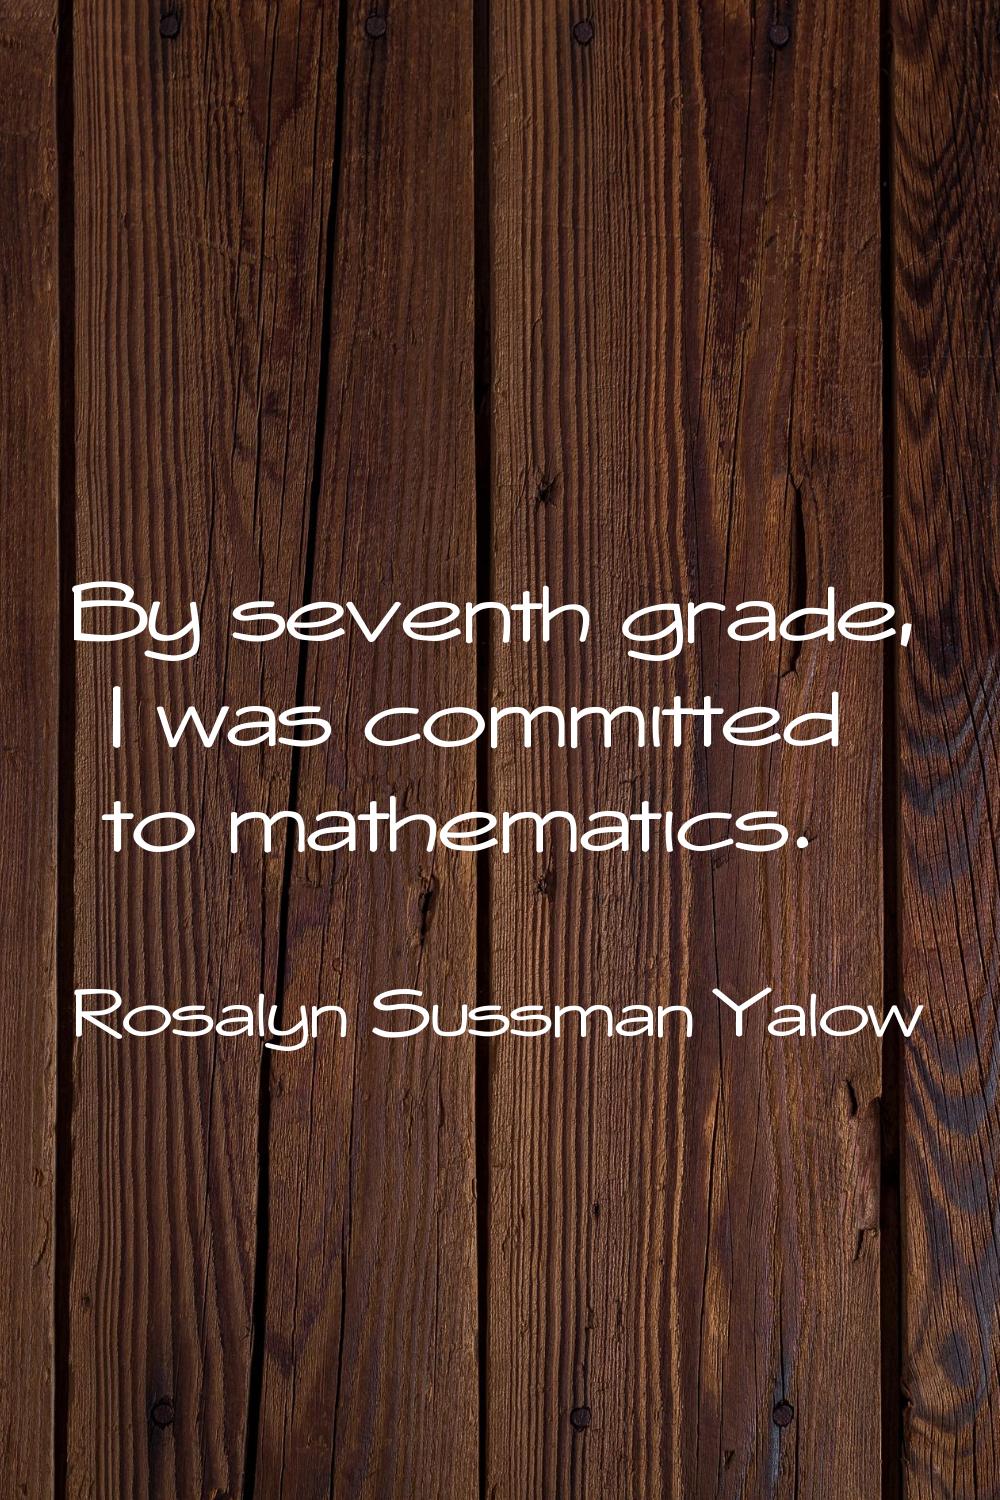 By seventh grade, I was committed to mathematics.